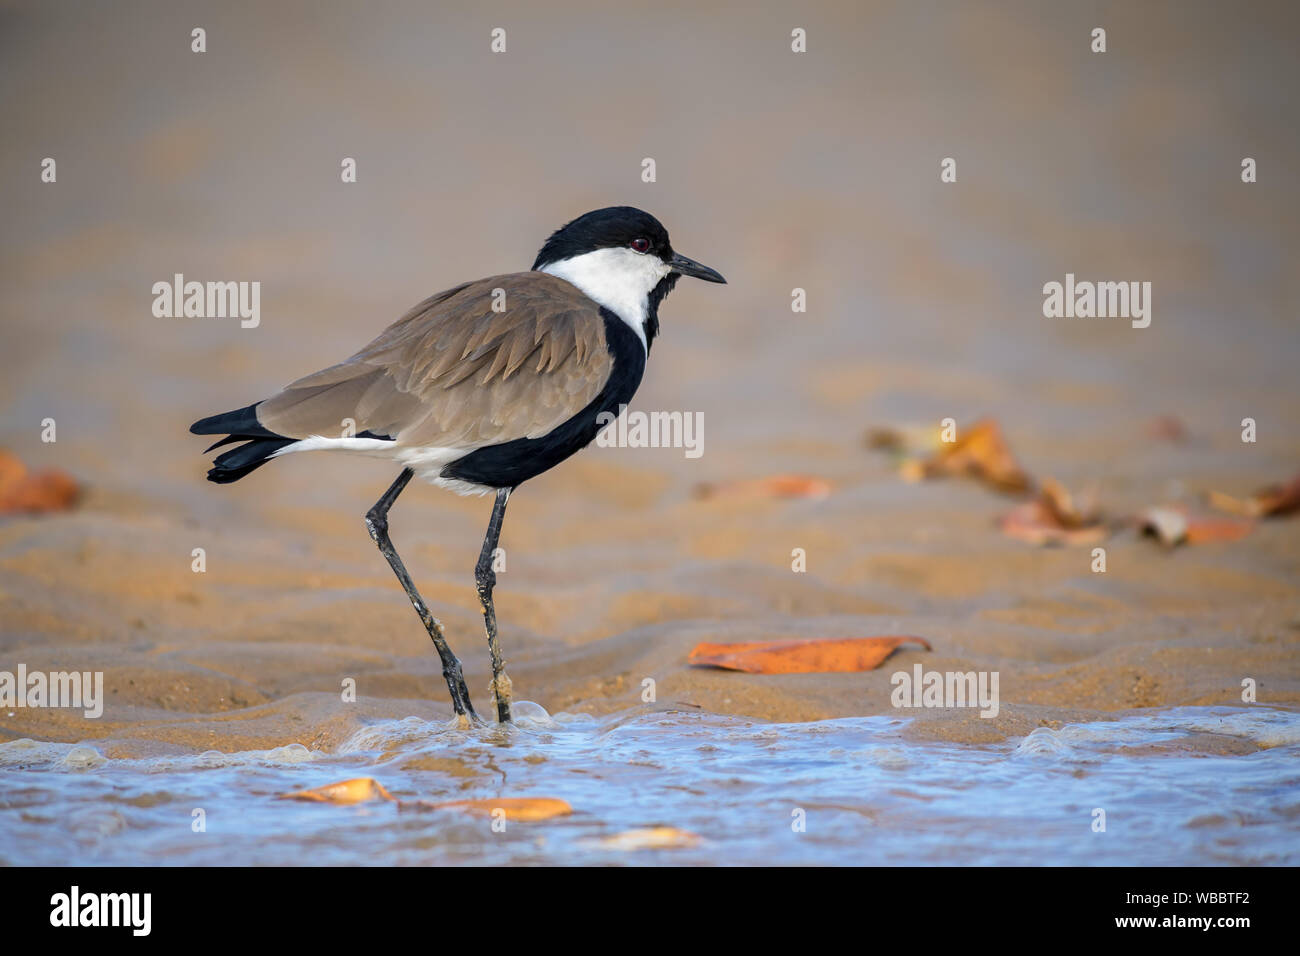 Spur-winged Plover - Vanellus spinosus, beautiful lapwing from West African fresh water, fields and meadows, La Somone, Senegal. Stock Photo